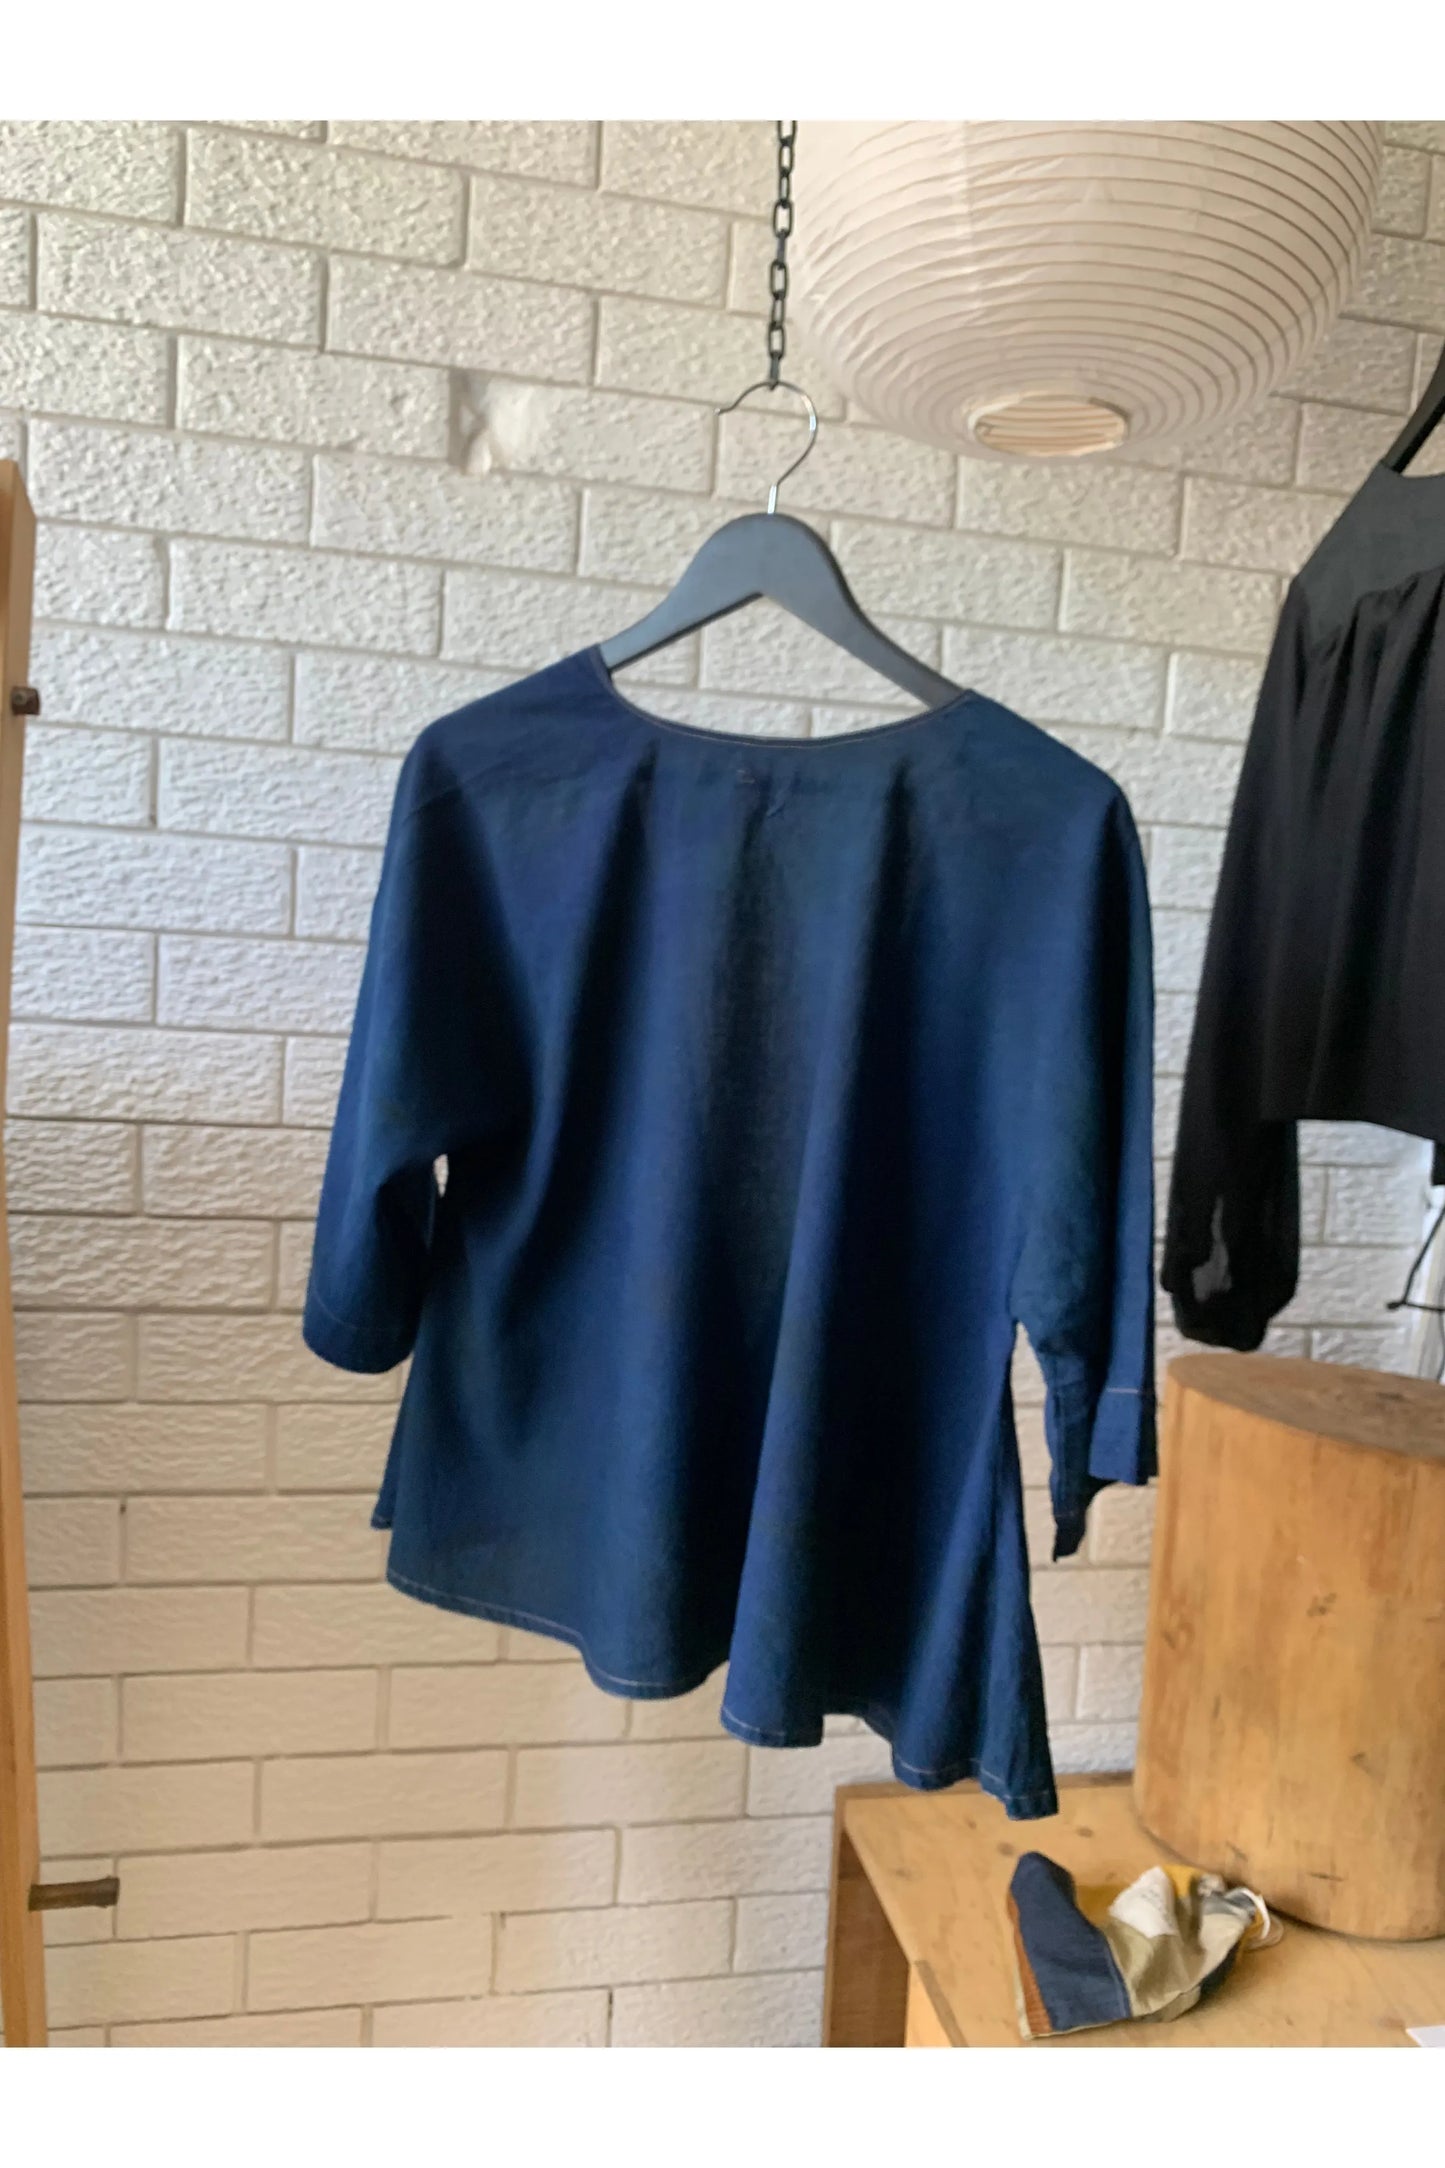 Hand dyed navy wrap top